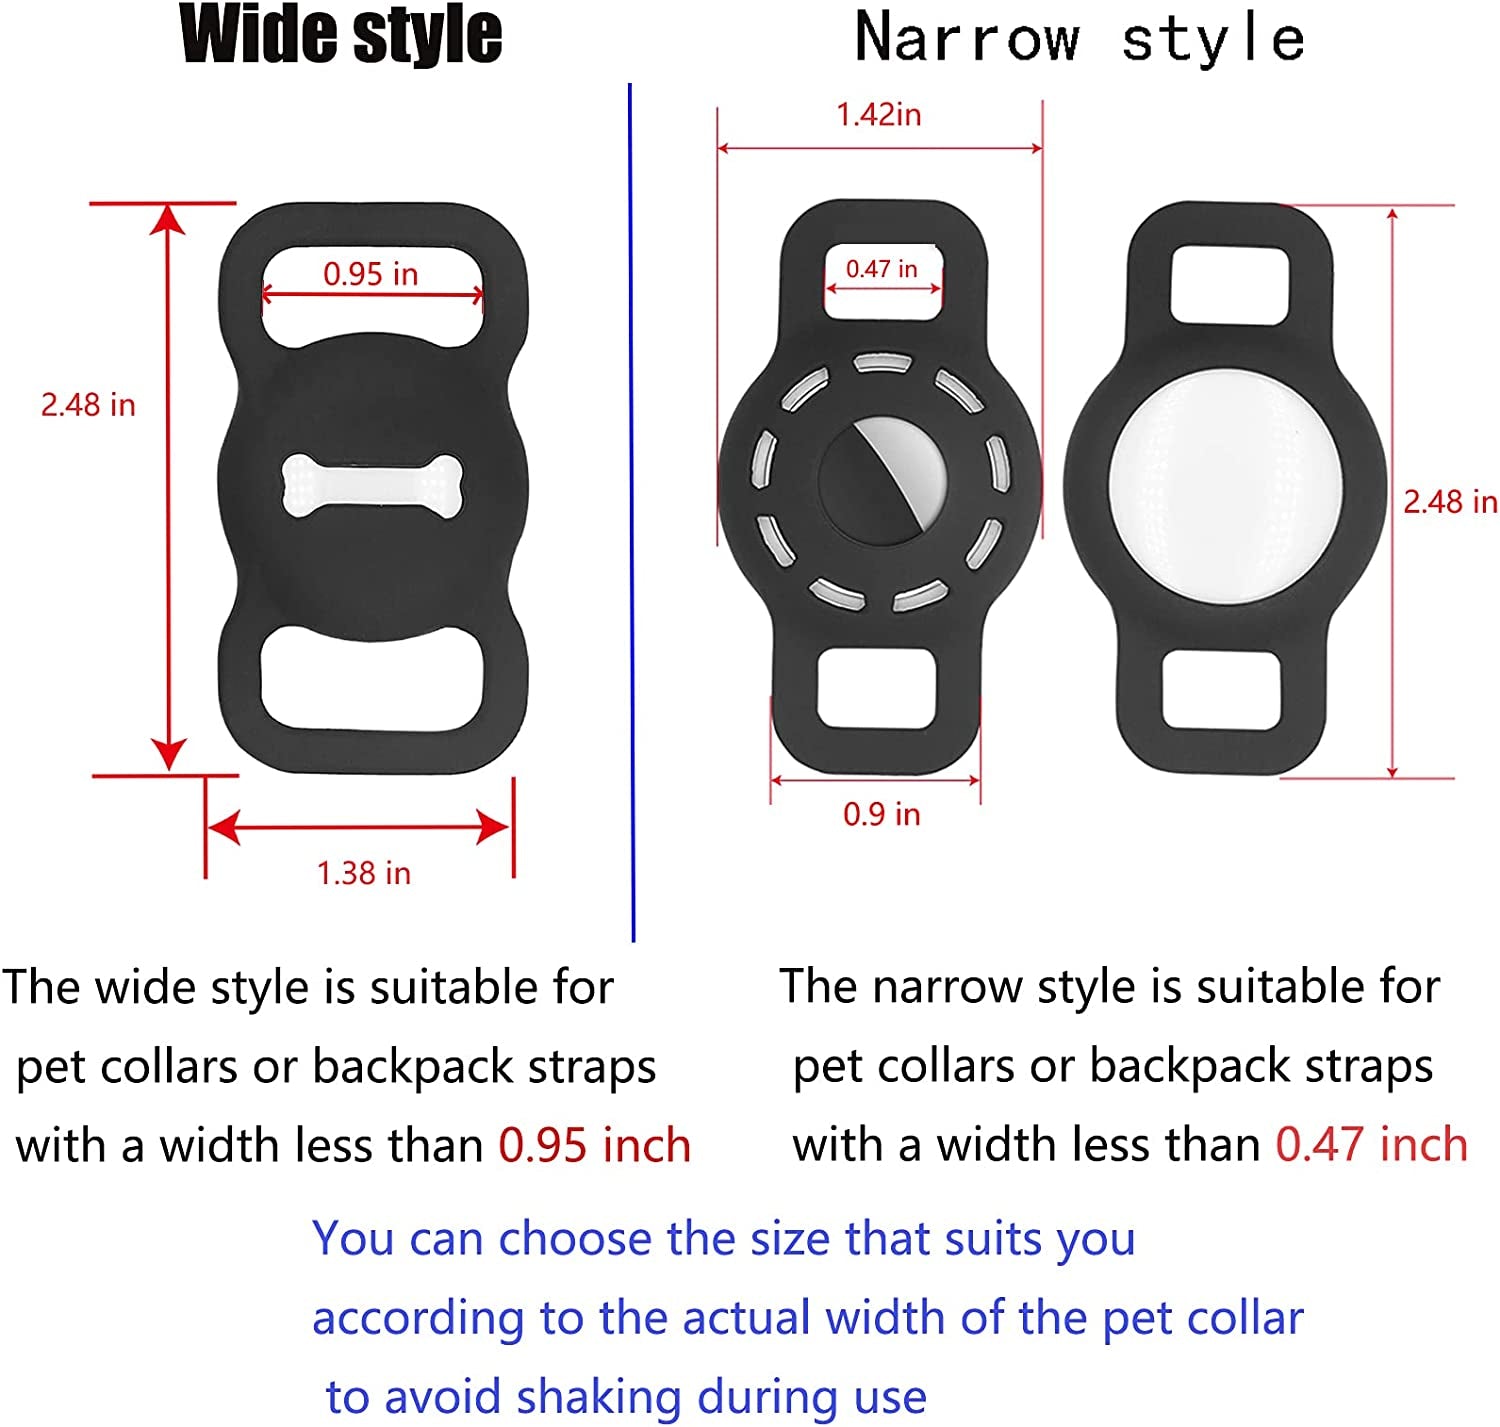 Air Tag Dog Collar Holder for Apple Airtag ,Air_Tag Case for Small Pet Animals,Cat Tracker Gps Tags,Anti-Lost Pet Collar Id Tags,Protective Silicone Cover for Gps Tracking Finder Children Elderly Bags Electronics > GPS Accessories > GPS Cases KJGLRSQH   